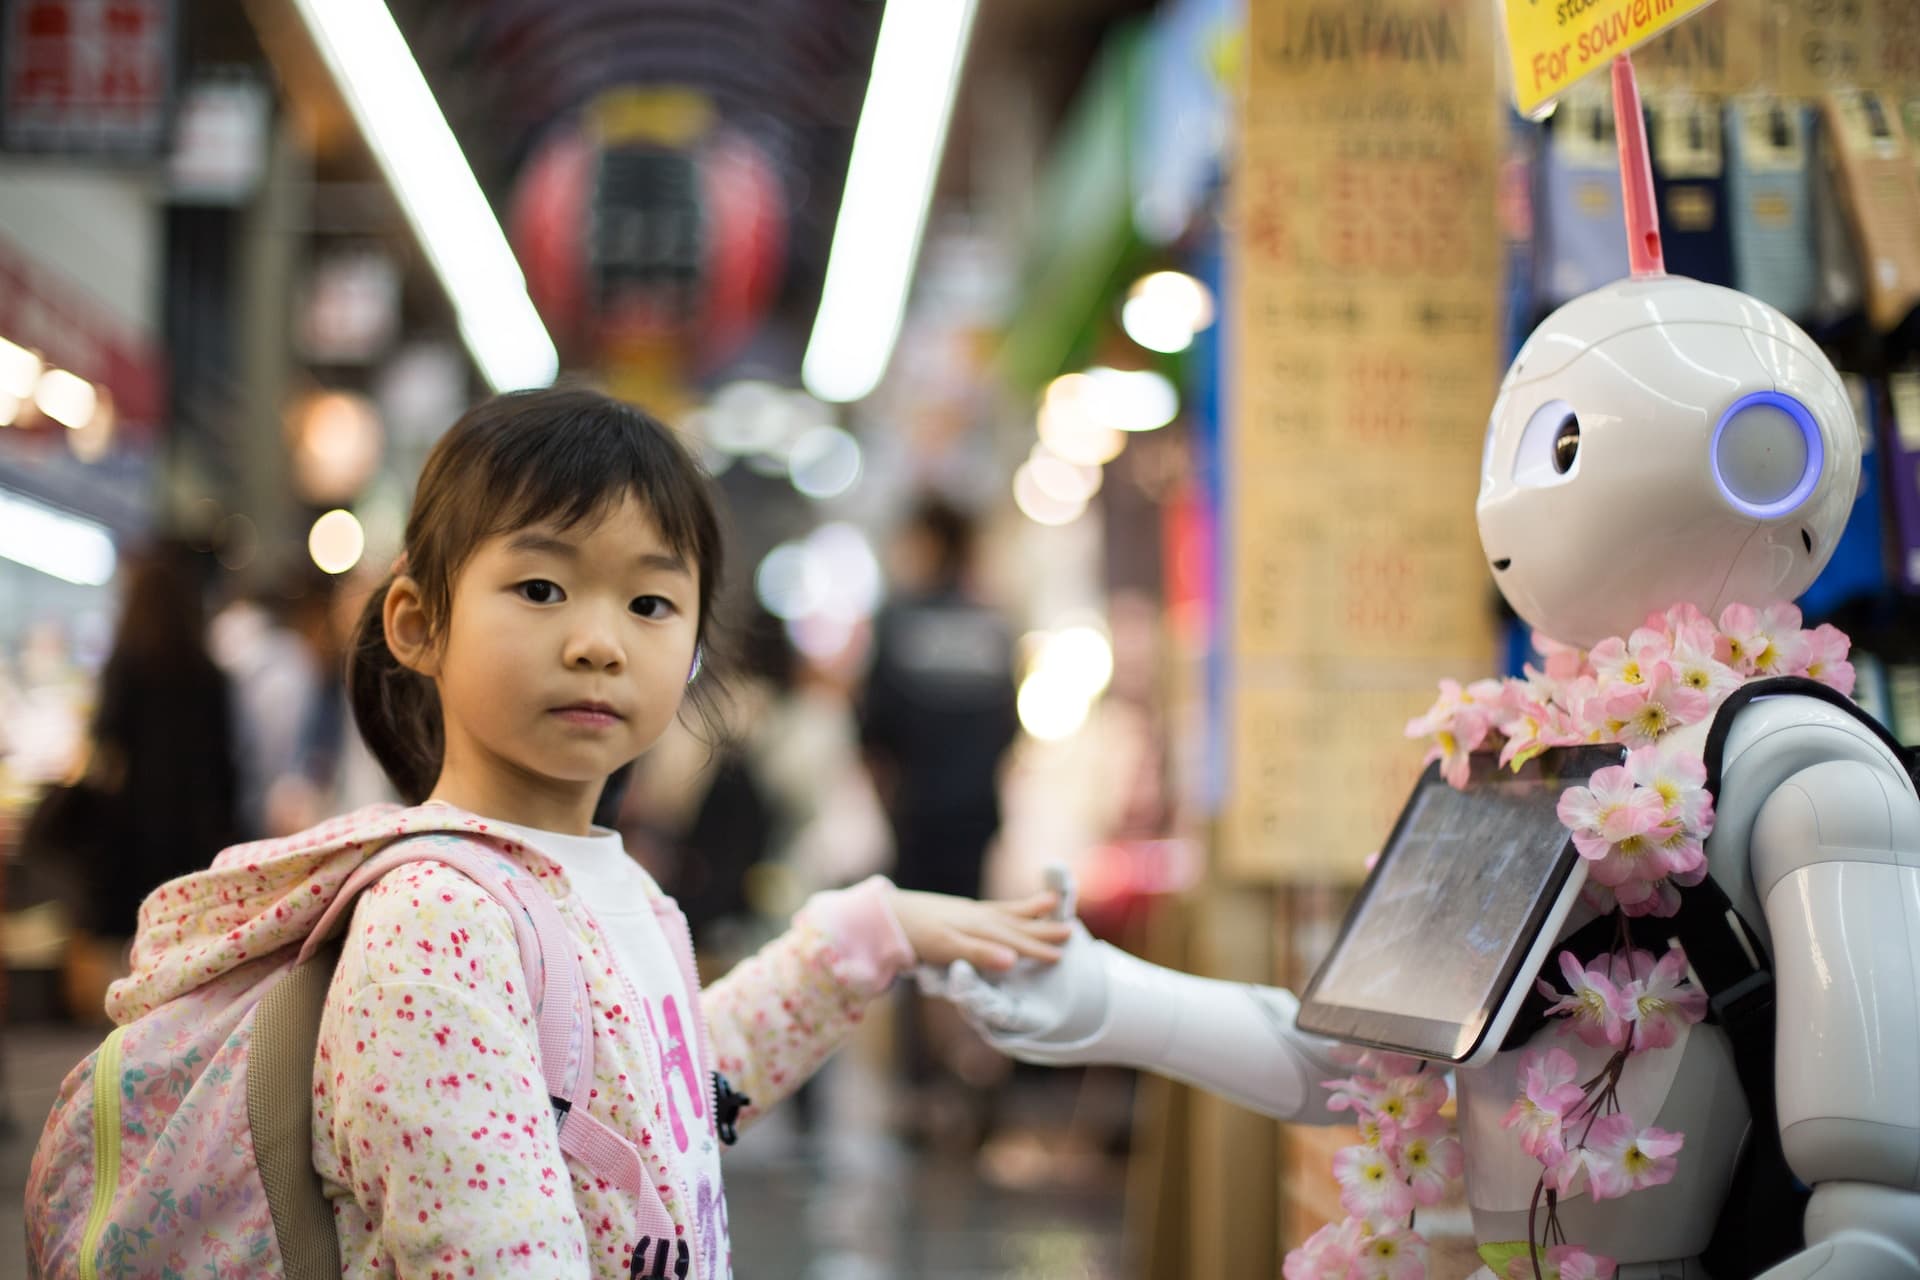 A small girl touching a hand of a humanoid robot